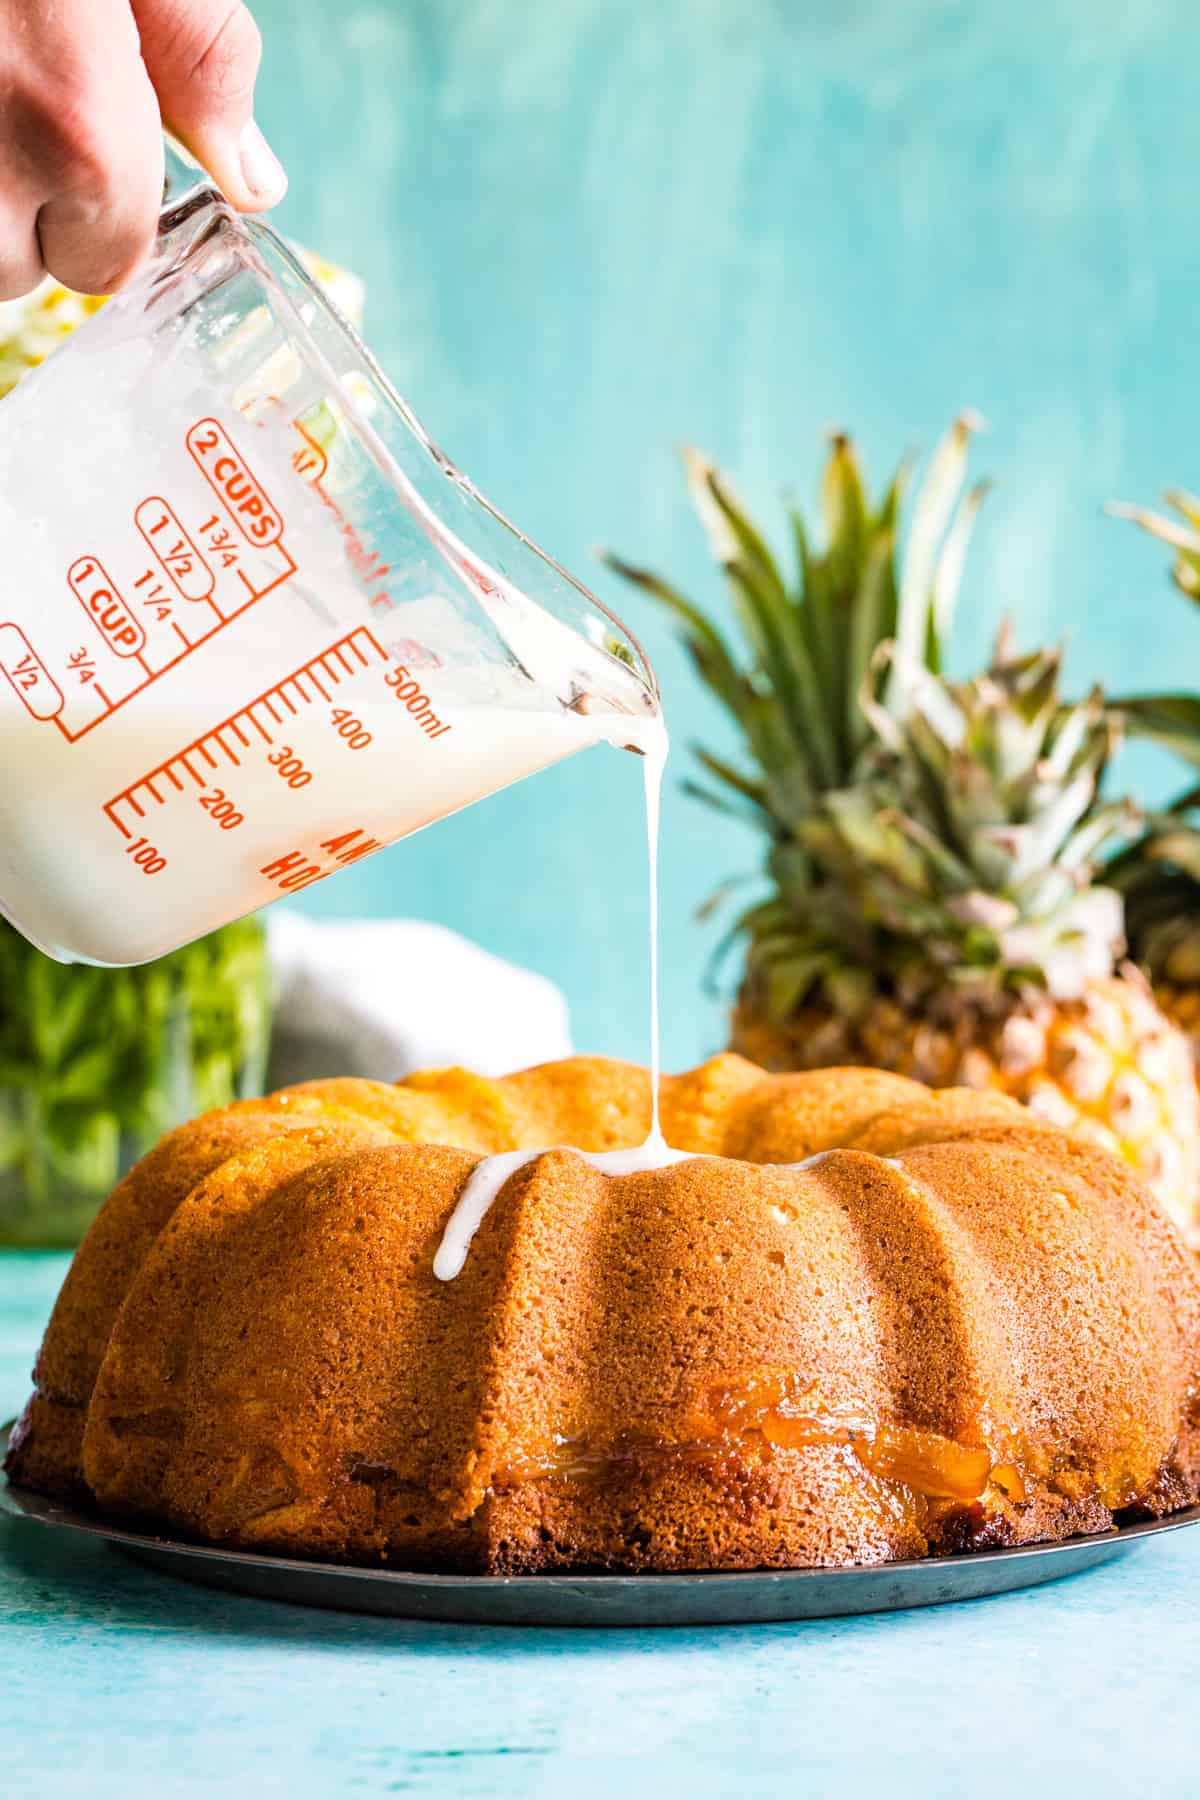 Pineapple Upside Down Bundt Cake - The Country Cook